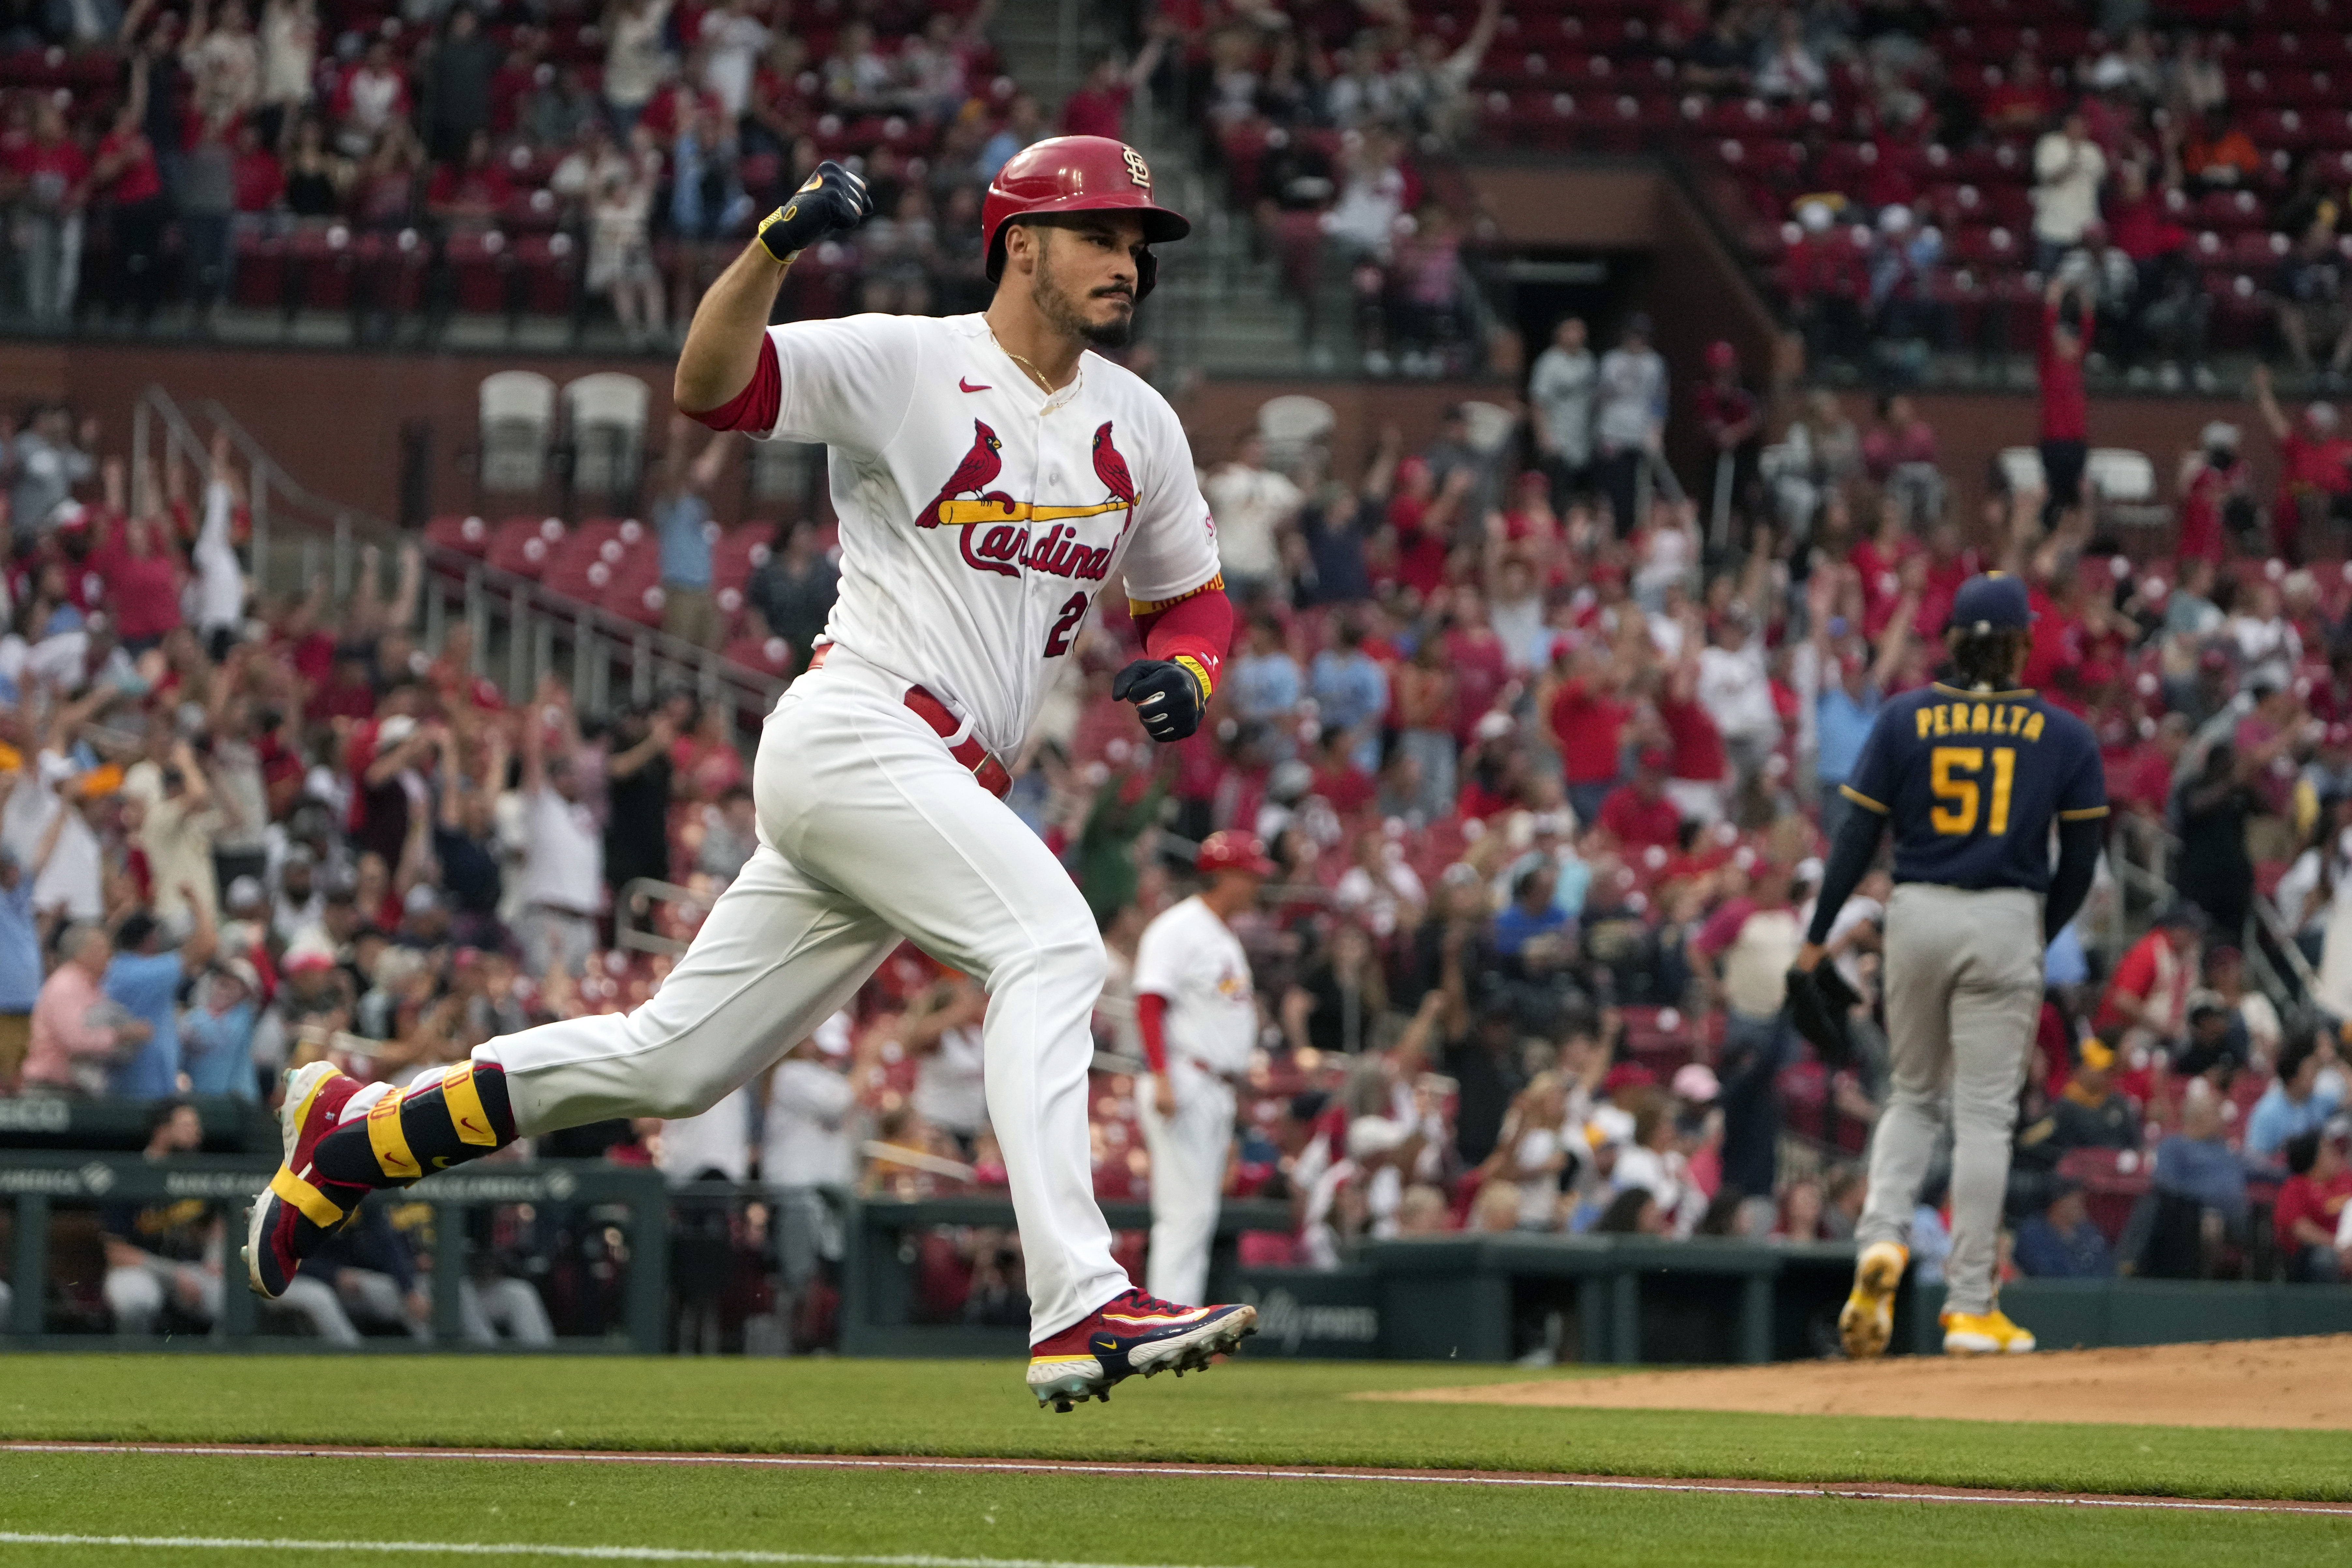 Edman hits second straight walk-off, Cardinals win series against